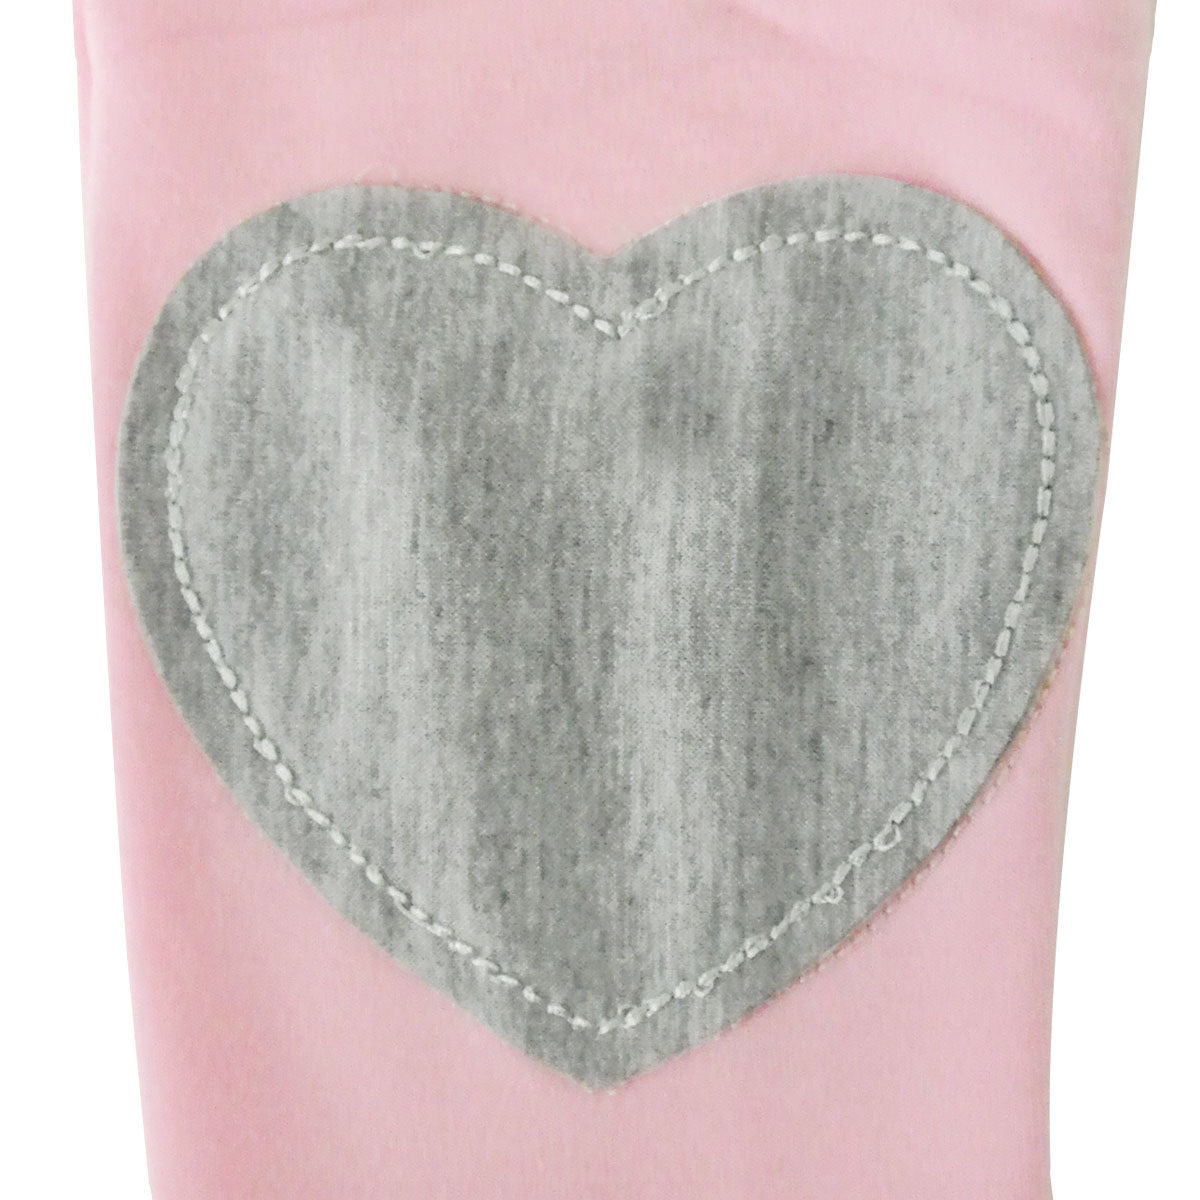 Wrapables Adorable Hearts Toddler Leggings